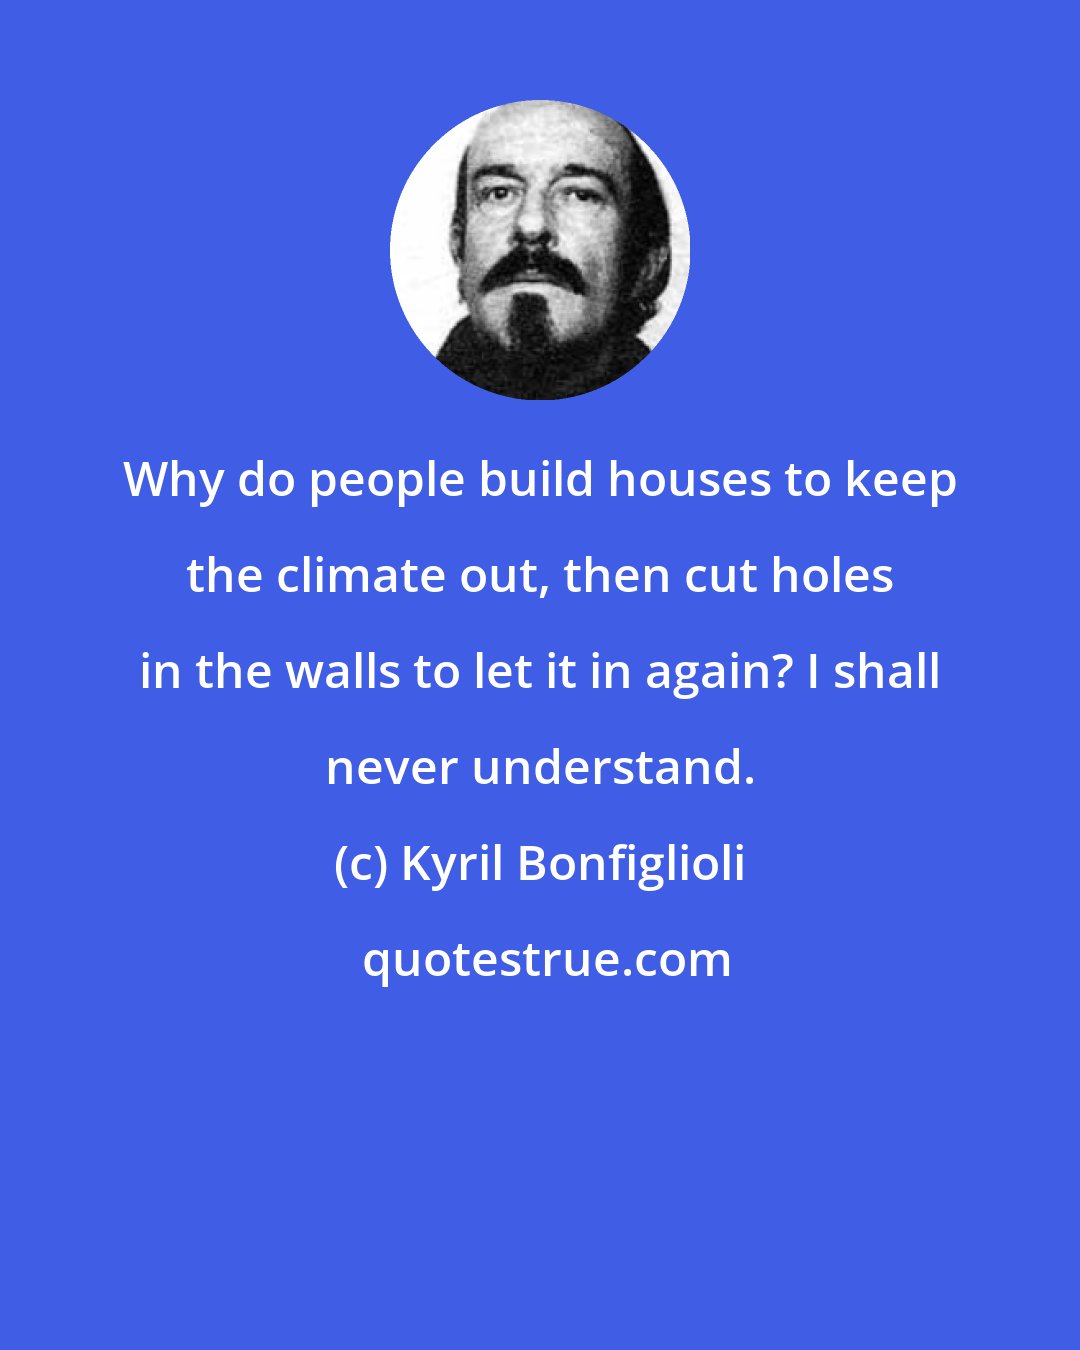 Kyril Bonfiglioli: Why do people build houses to keep the climate out, then cut holes in the walls to let it in again? I shall never understand.